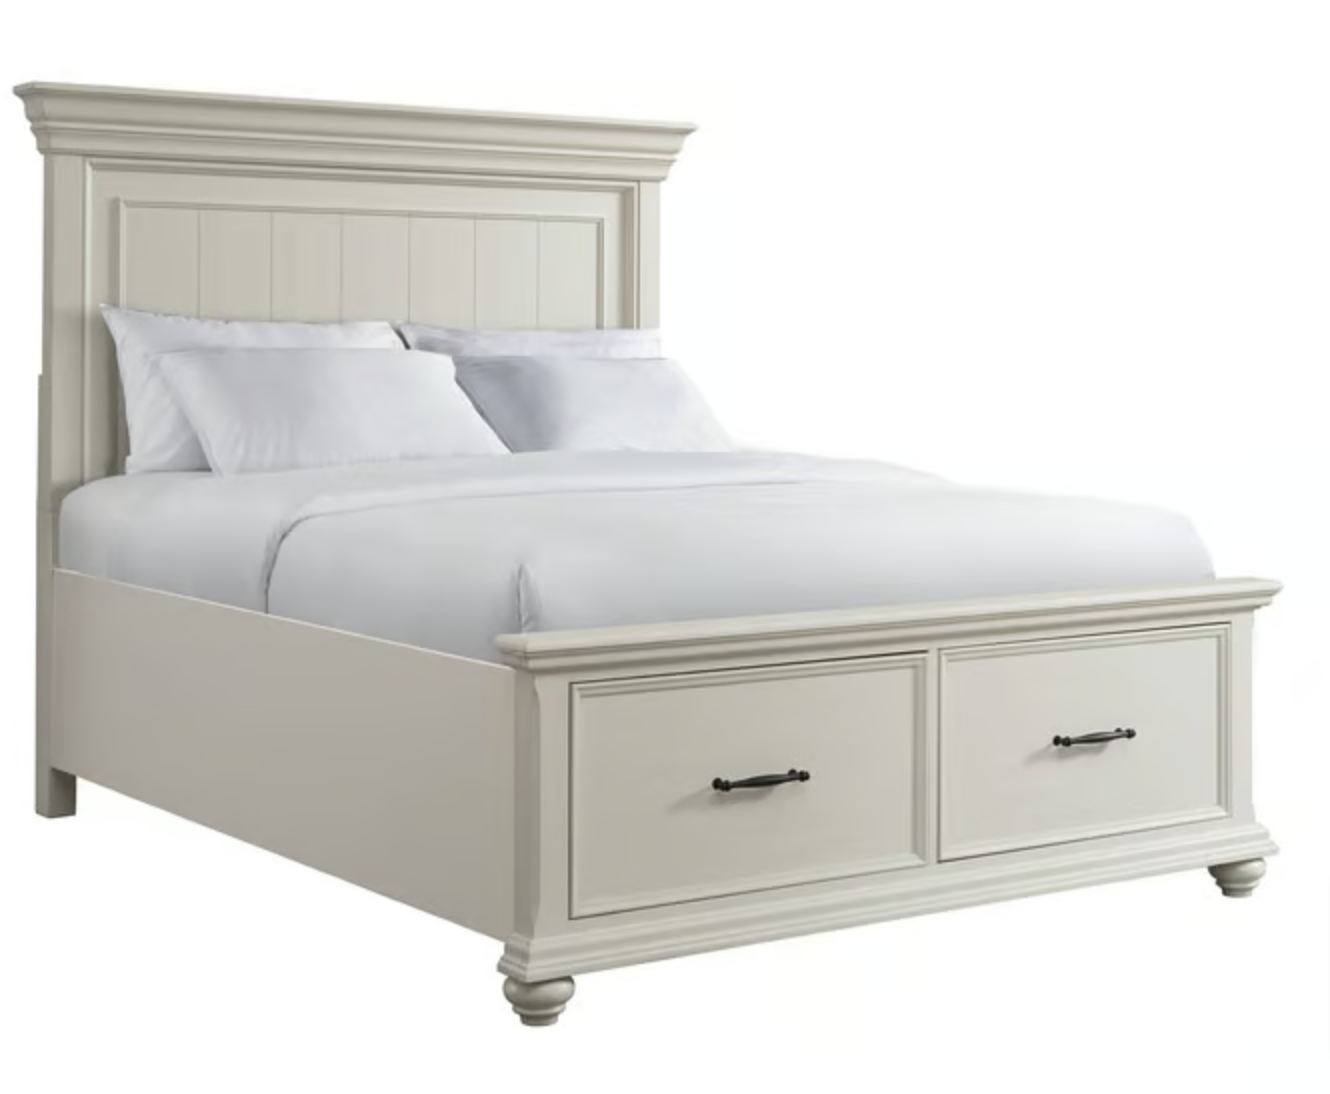 Slater Collection Storage Bed - Antique White